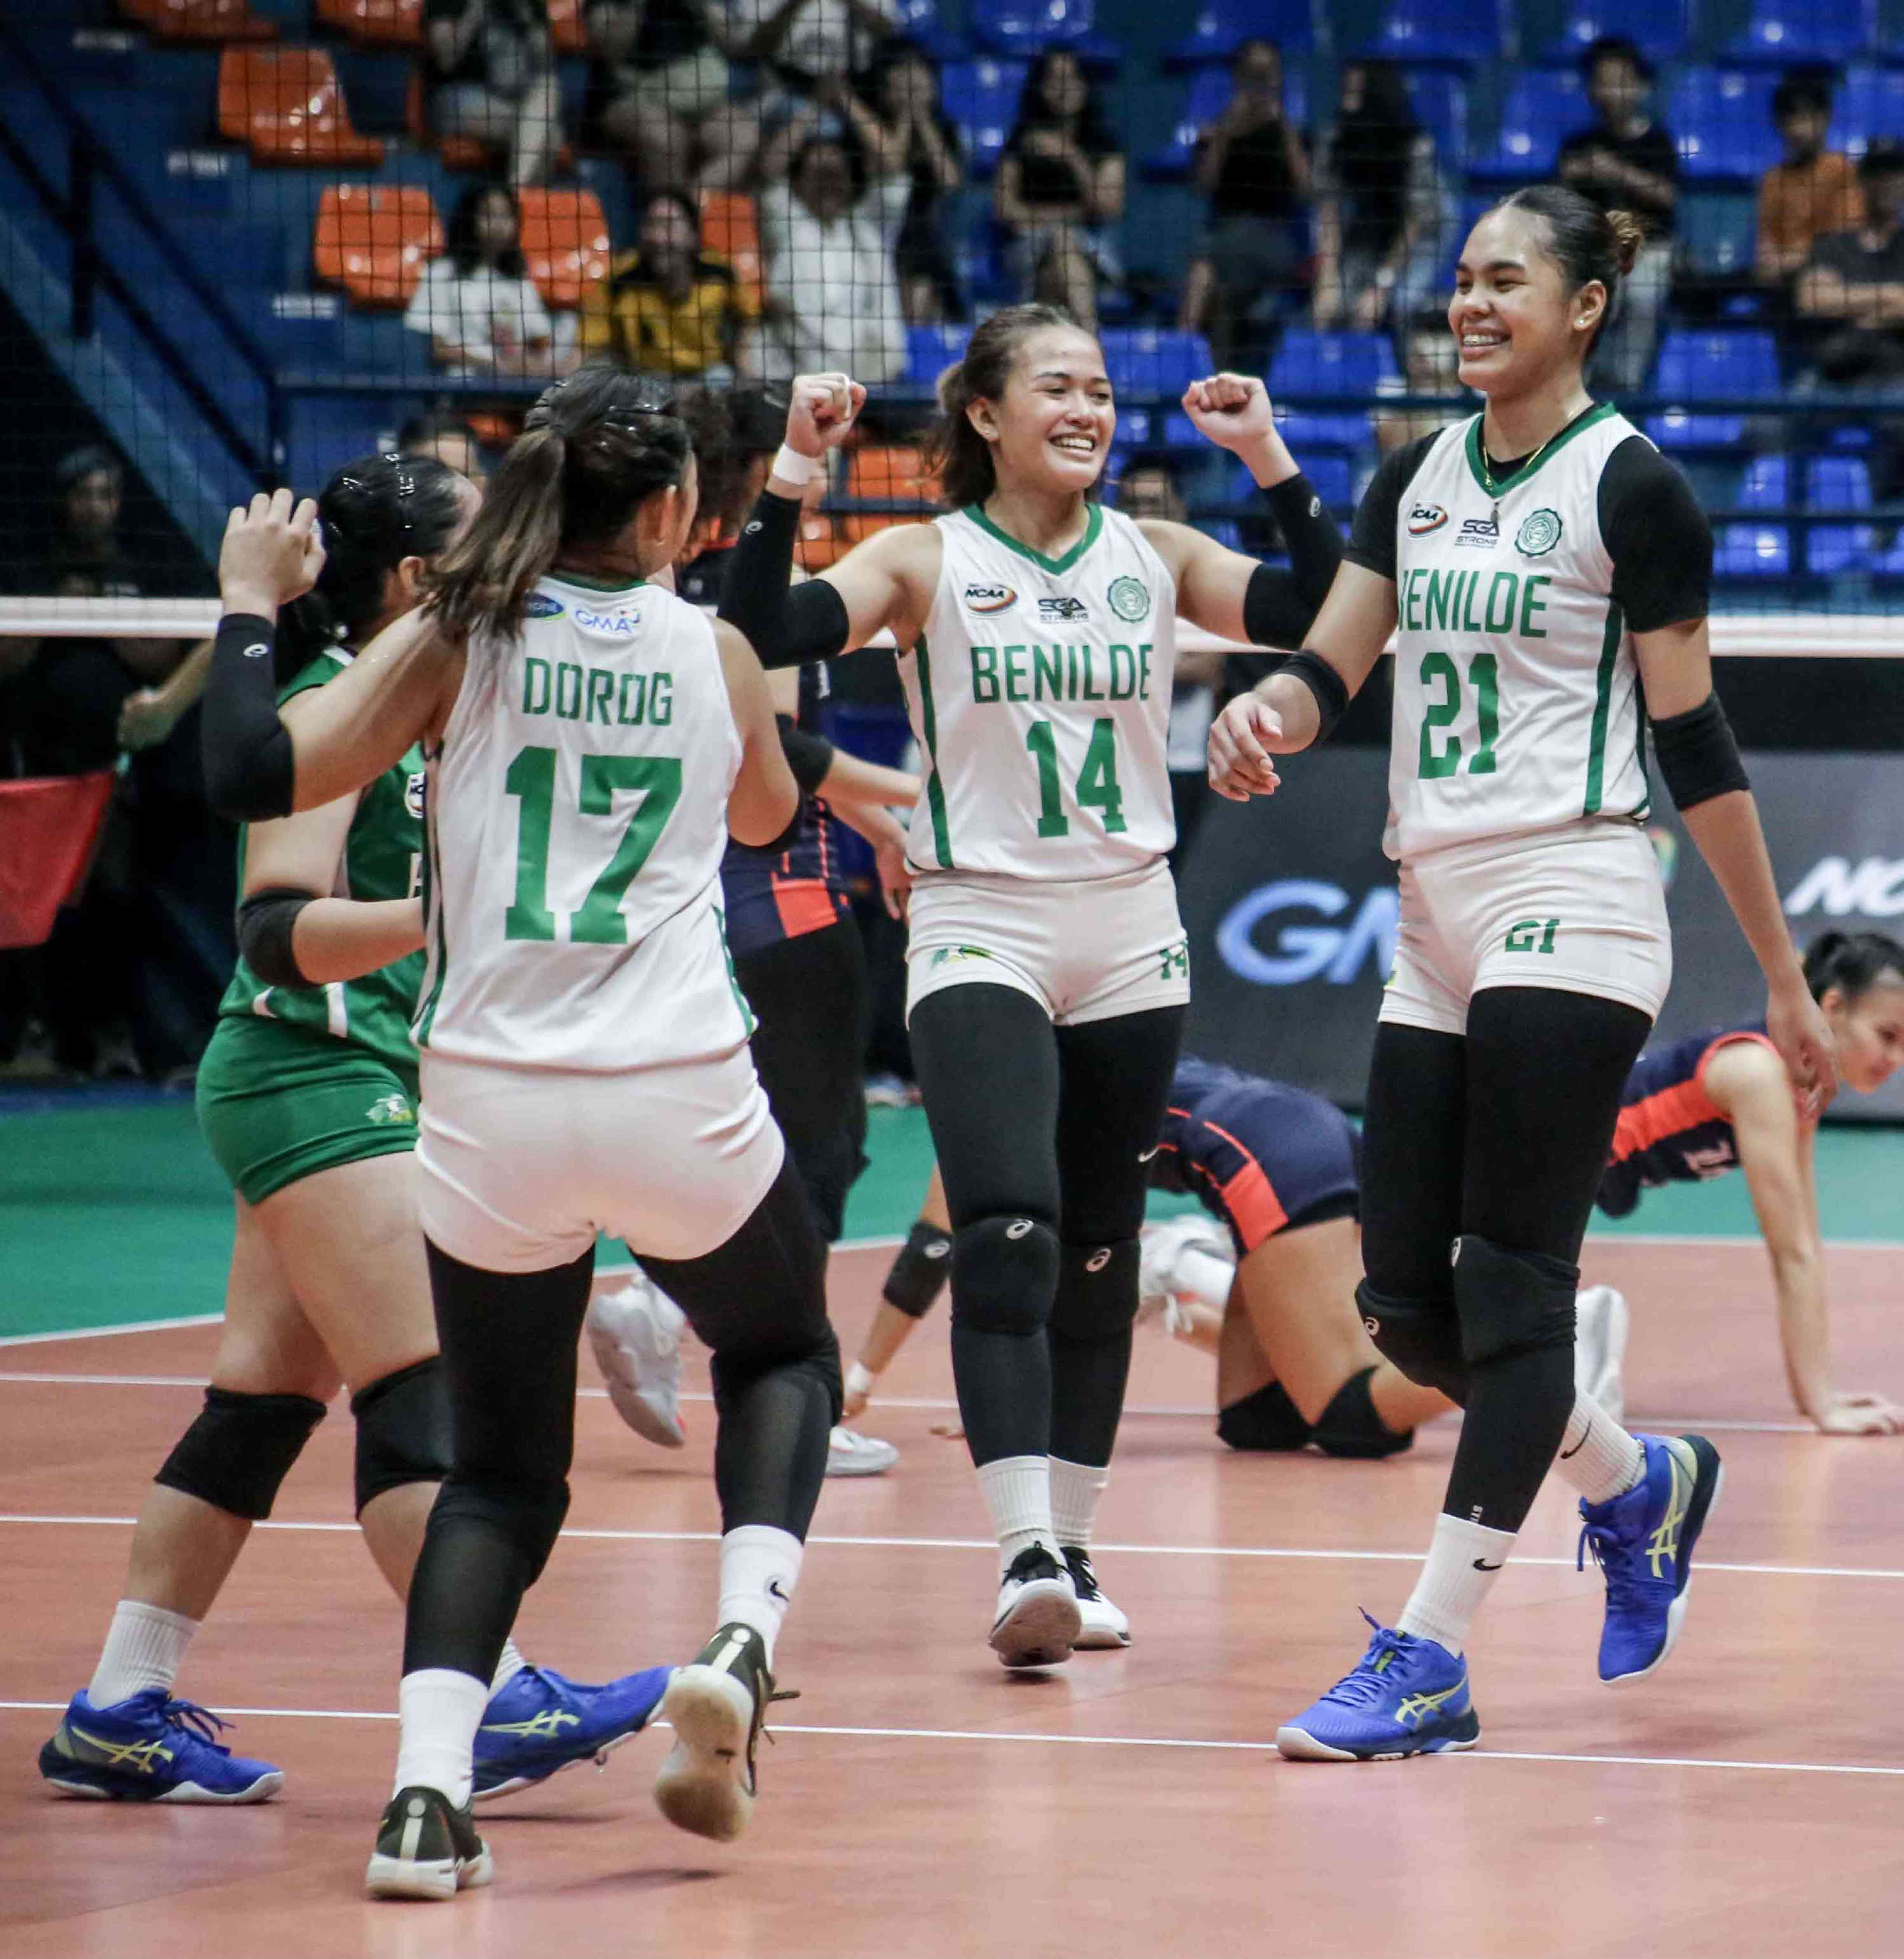 St. Benilde inches closer to another unchallenged reign; Perpetual triumphs